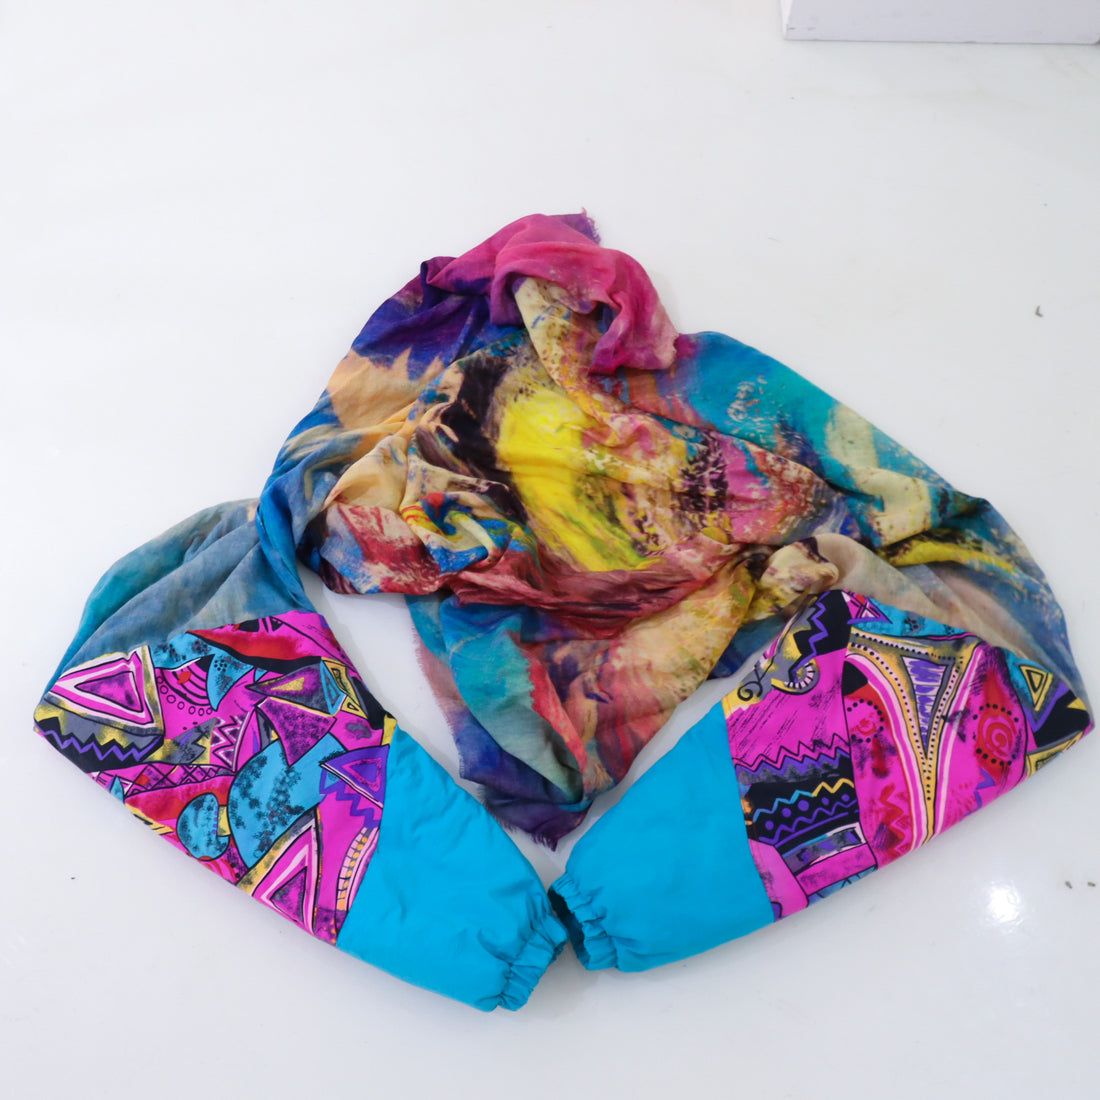 BLESS PUFFED SLEEVE SCARF MIX COLOR